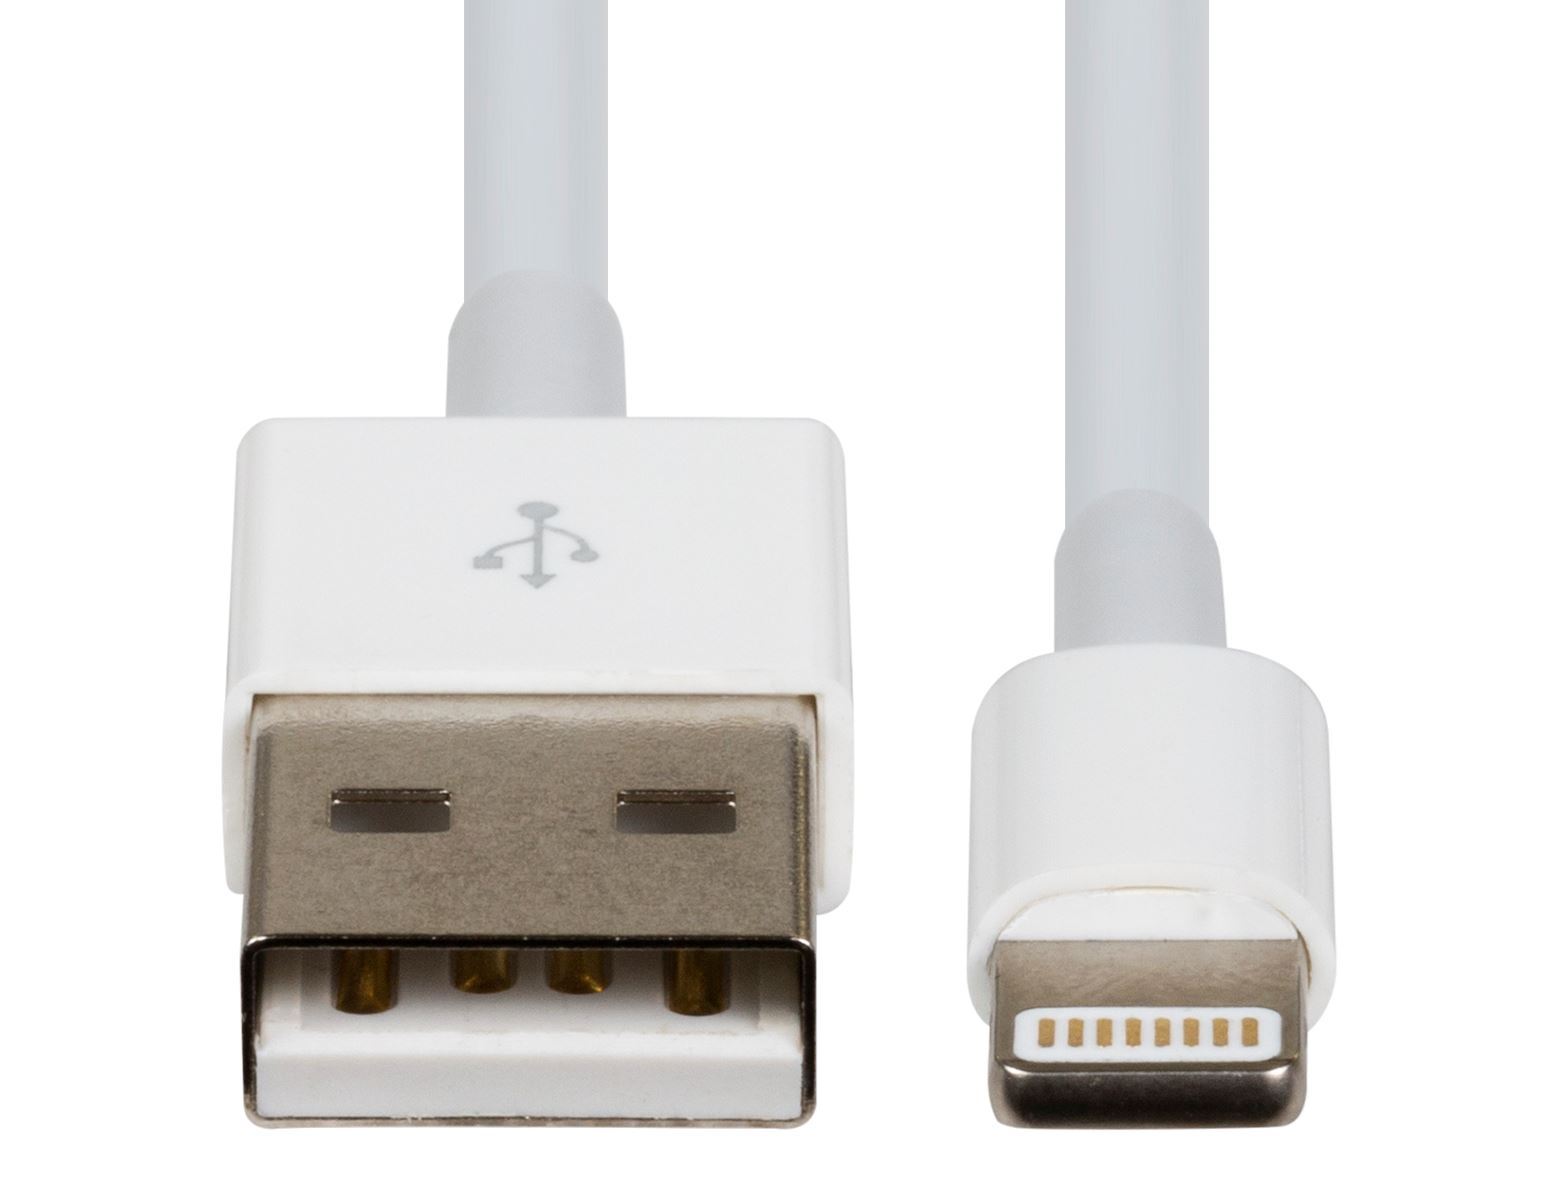 DYNAMIX_1m_USB-A_to_Lightning_Charge_&_Sync_Cable._For_Apple_iPhone,_iPad,_iPad_mini_&_iPods_*Not_MFI_Certified* 926